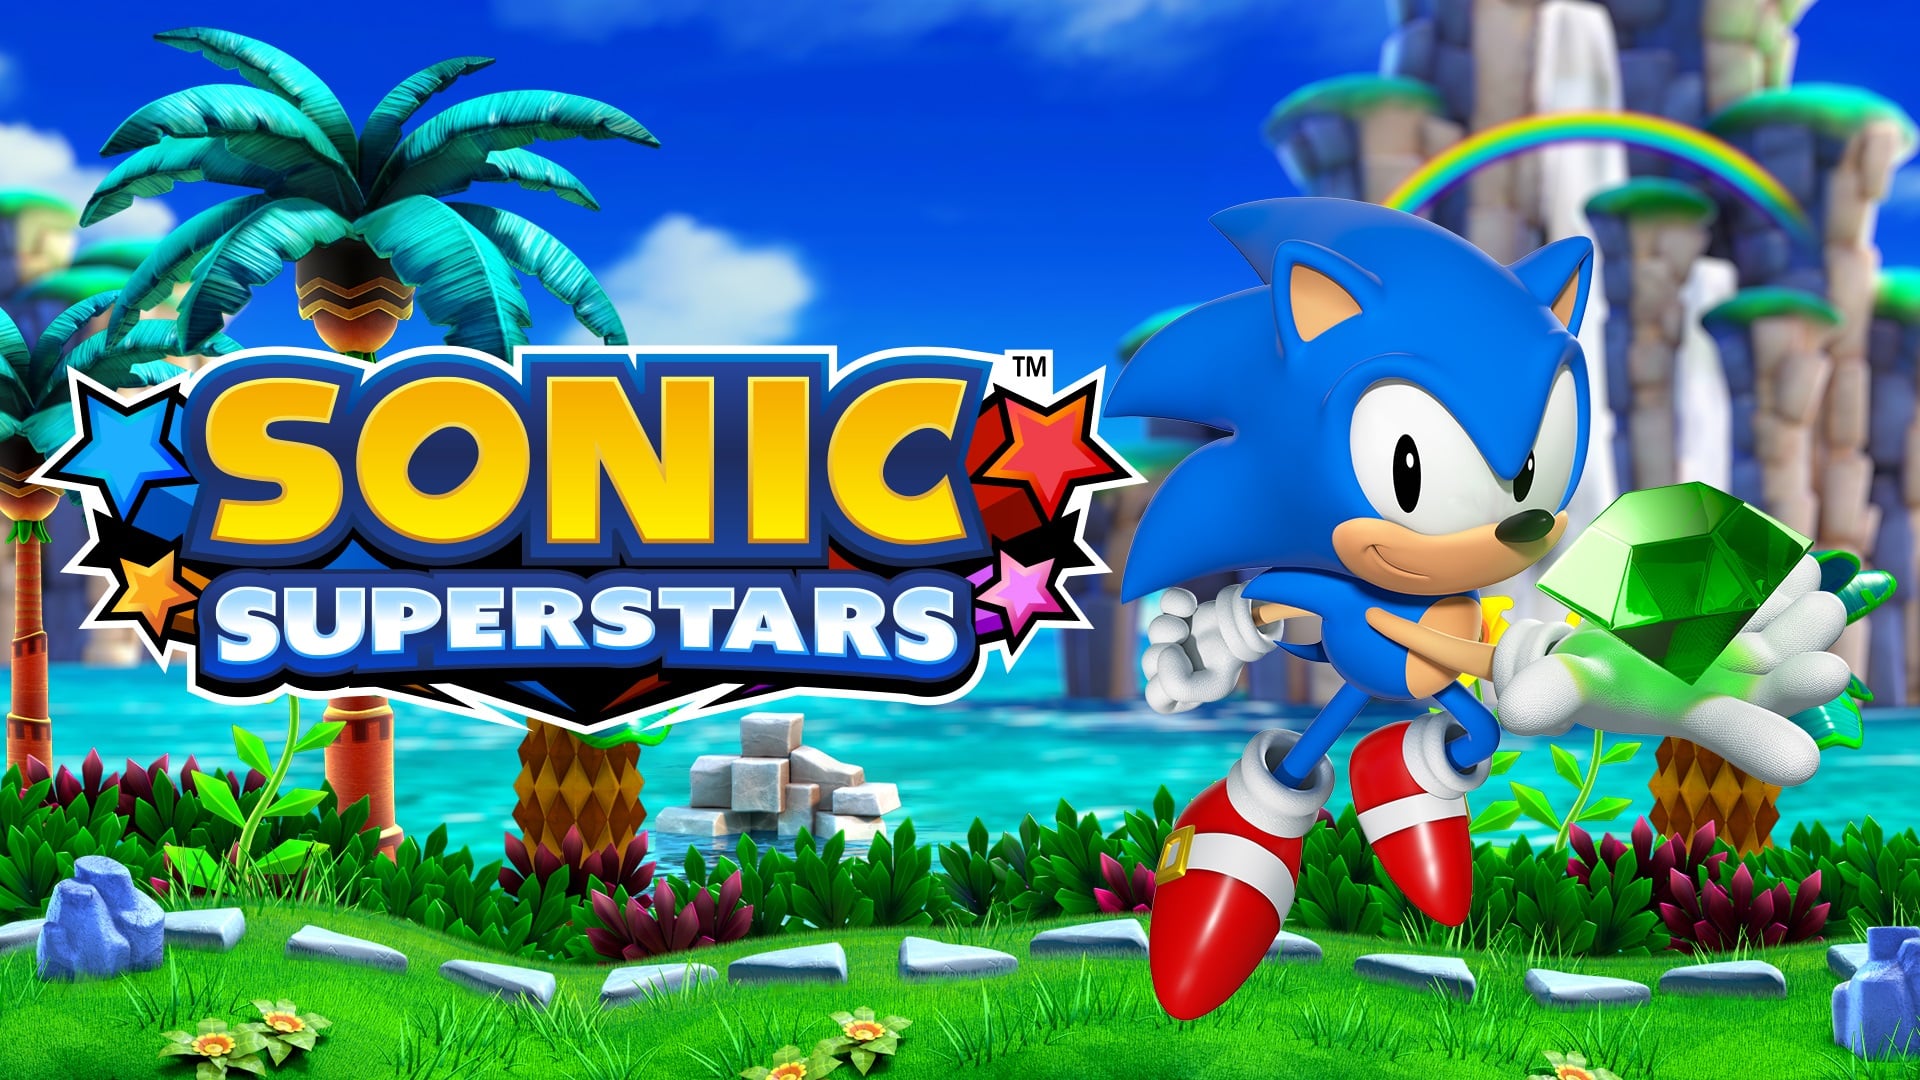 Sonic Superstars Pre-Order Guide: All Editions, Prices, and where